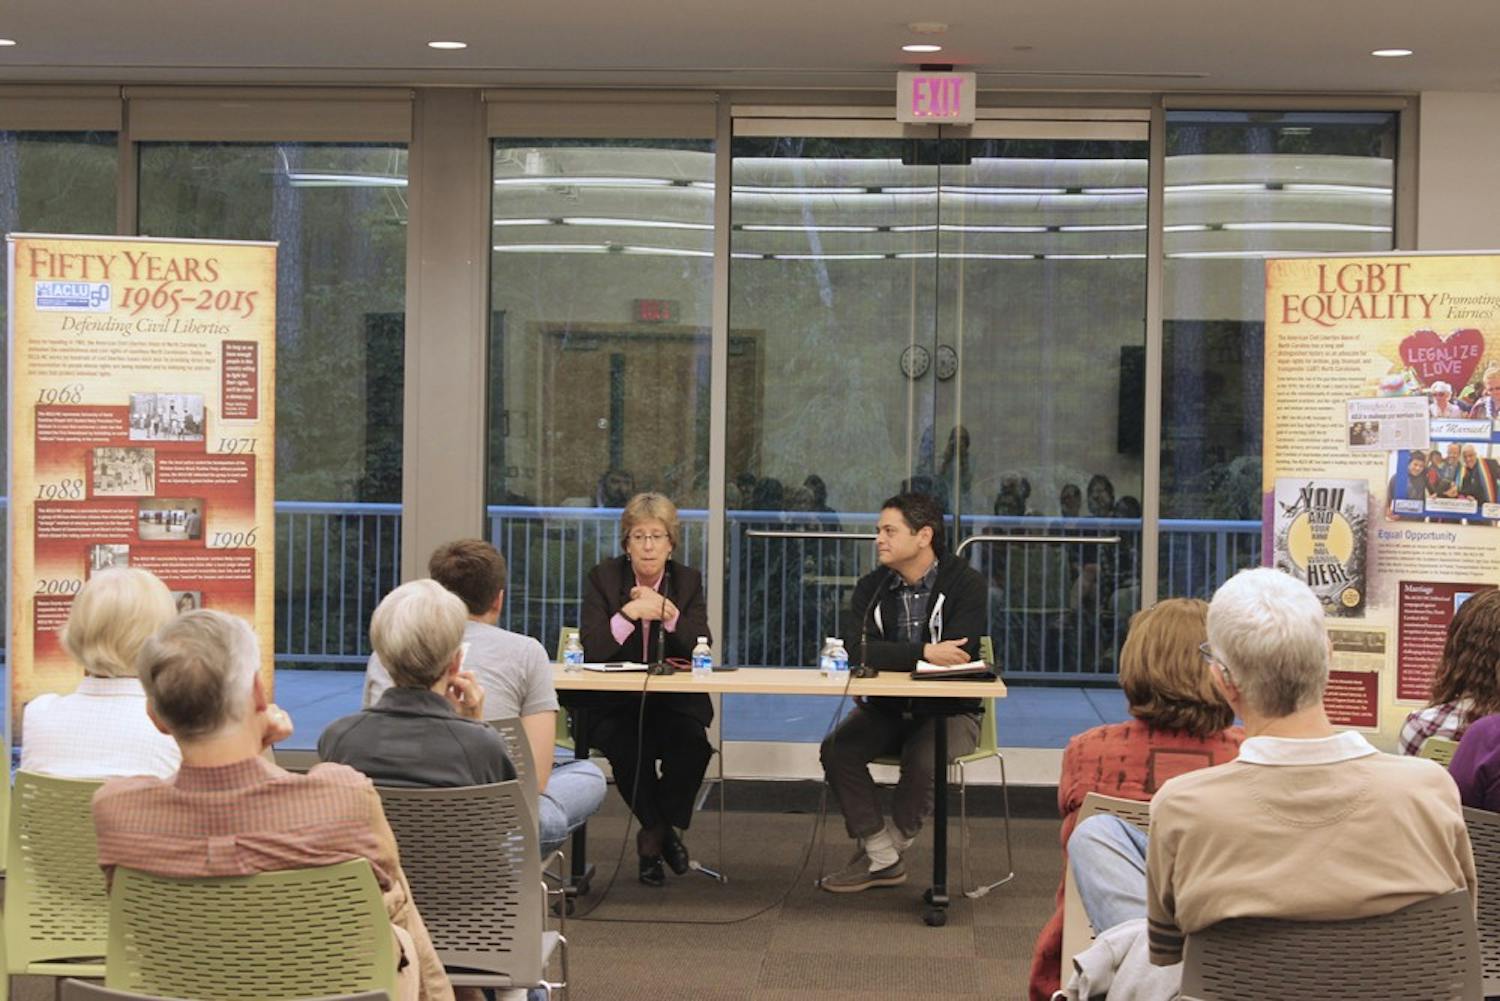 Chapel Hill mayor Mark Kleinschmidt and Carrboro mayor Lydia Lavelle host a panel discussion Monday evening at Mayor & Mayor: A Conversation about LGBTQ Struggles in North Carolina, part of the ACLU-NC 50th Anniversary Exhibit at the Chapel Hill Public Library.